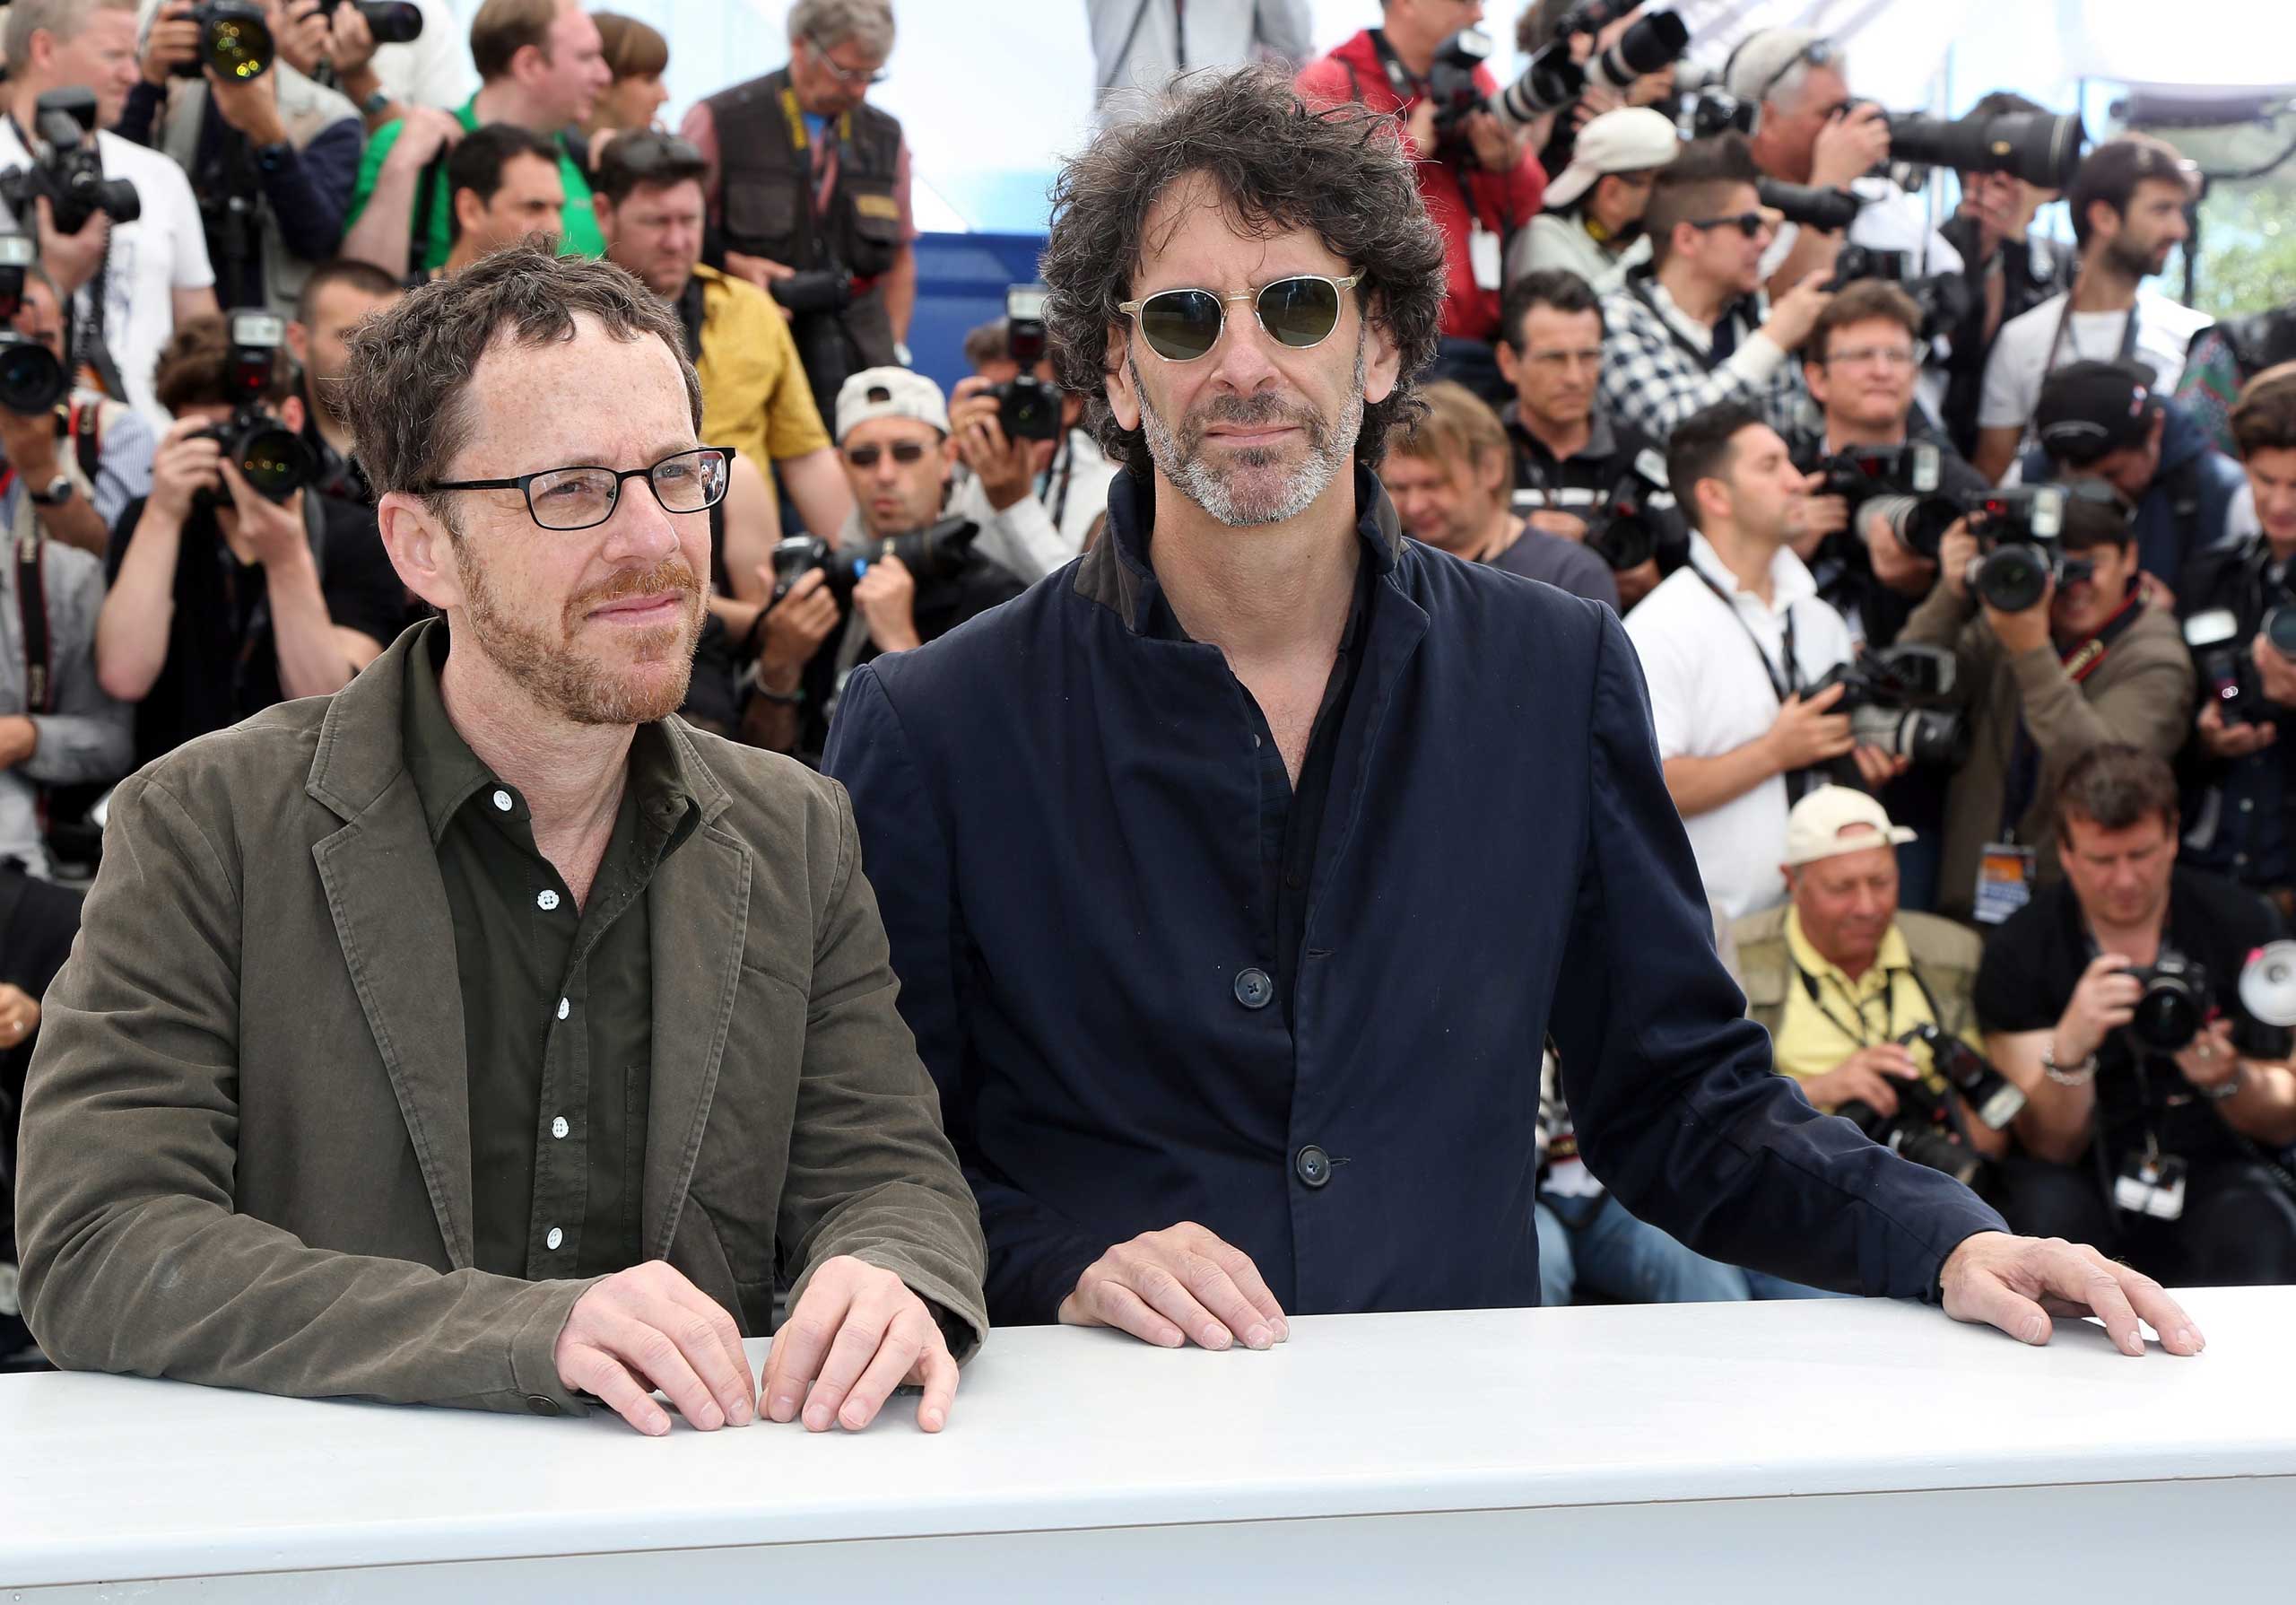 Coen Brothers Named Jury Presidents of 68th Cannes Film Festival